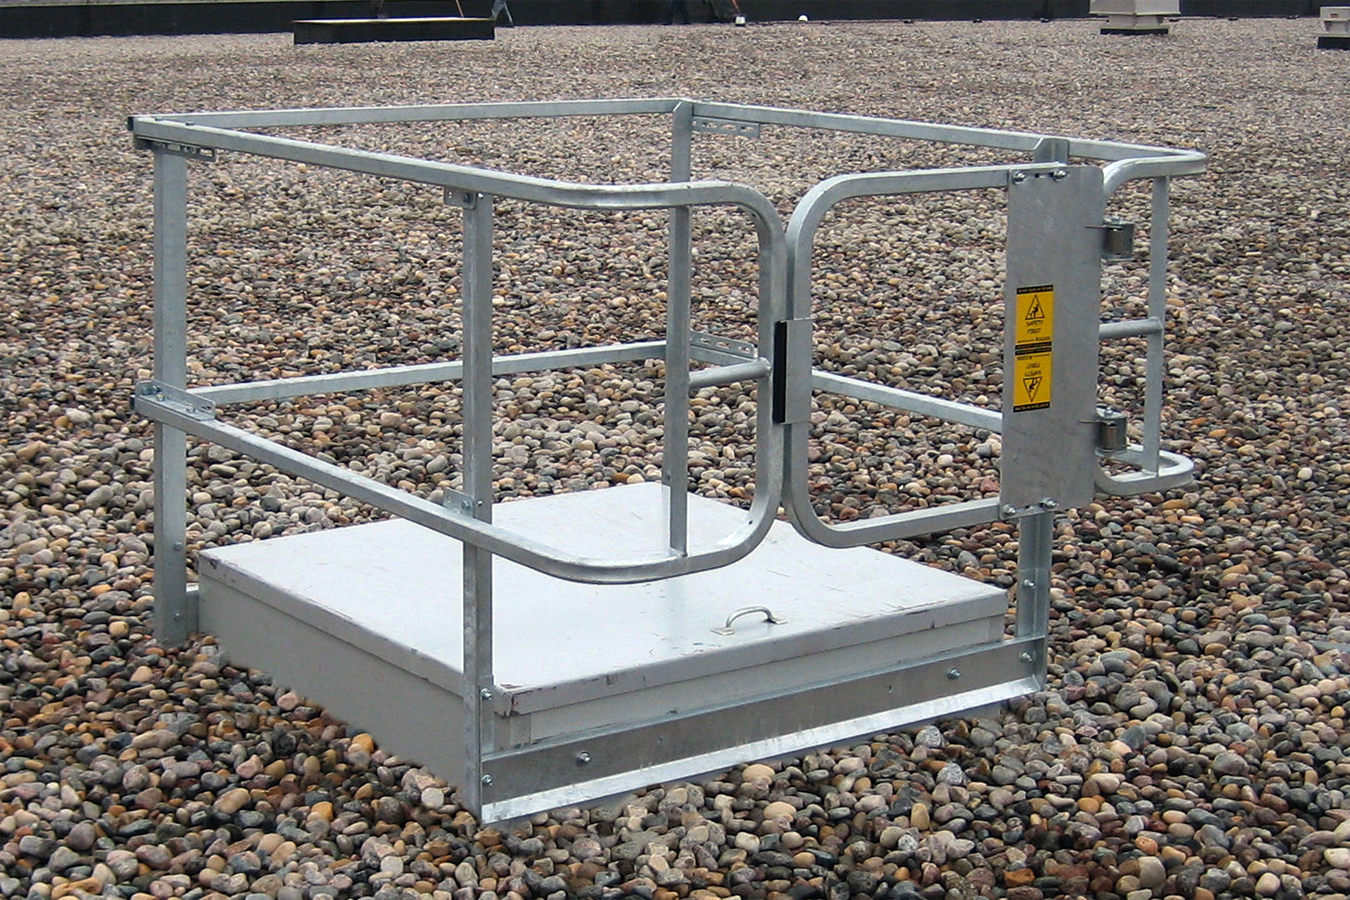 The roof hatch railing includes a self-closing safety gate for a passive safety system that closes automatically